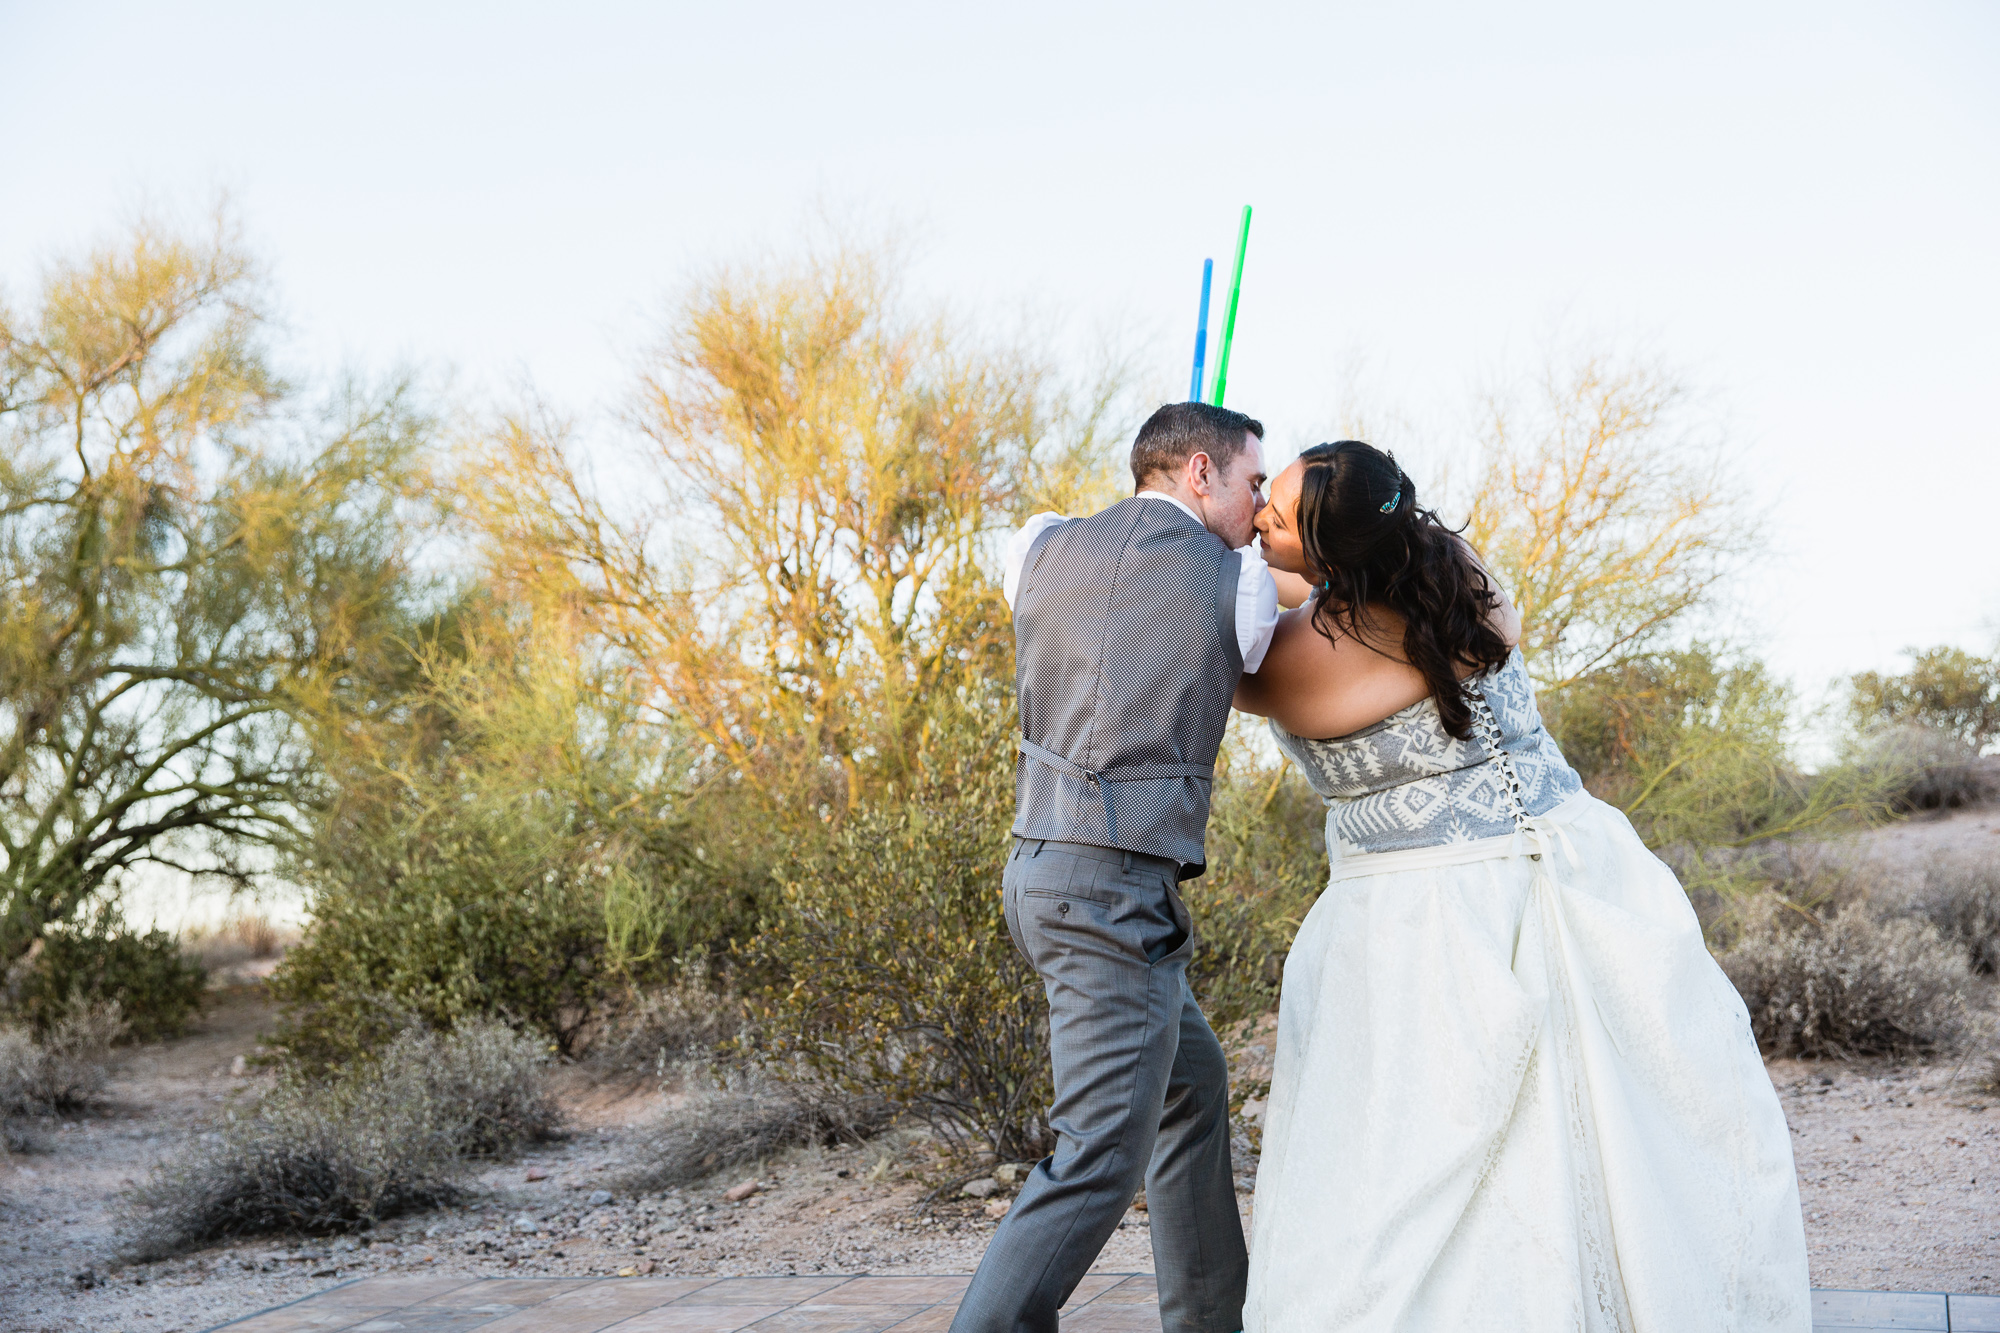 Bride and groom in a light saber duel to start their first dance at their Lost Dutchman State Park wedding reception by Arizona wedding photographer PMA Photography.